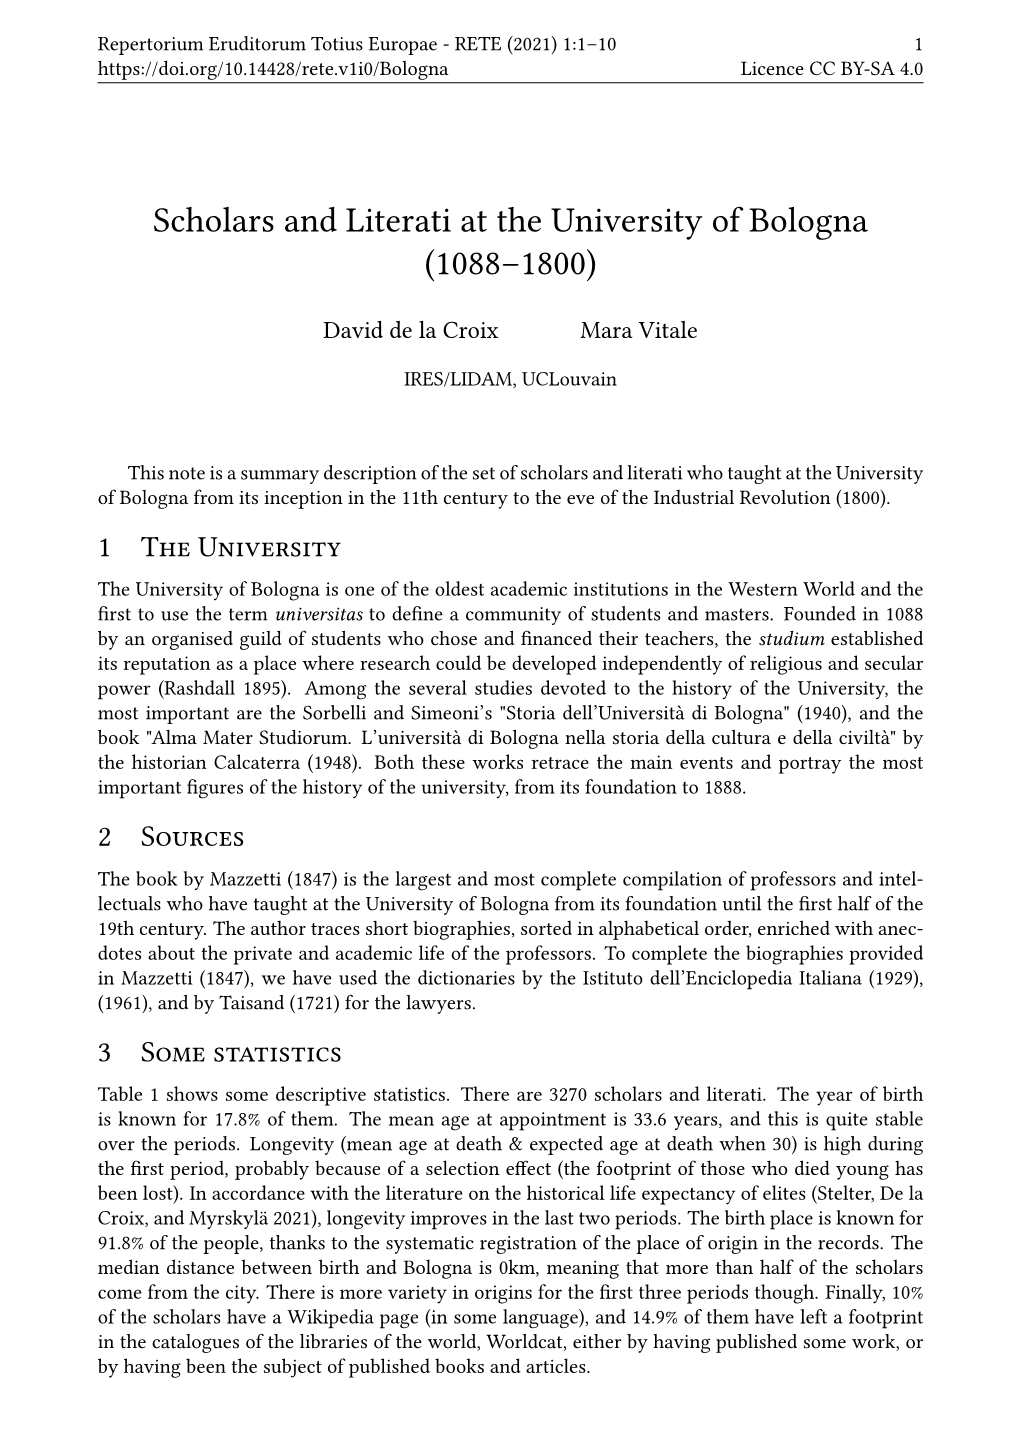 Scholars and Literati at the University of Bologna (1088–1800)